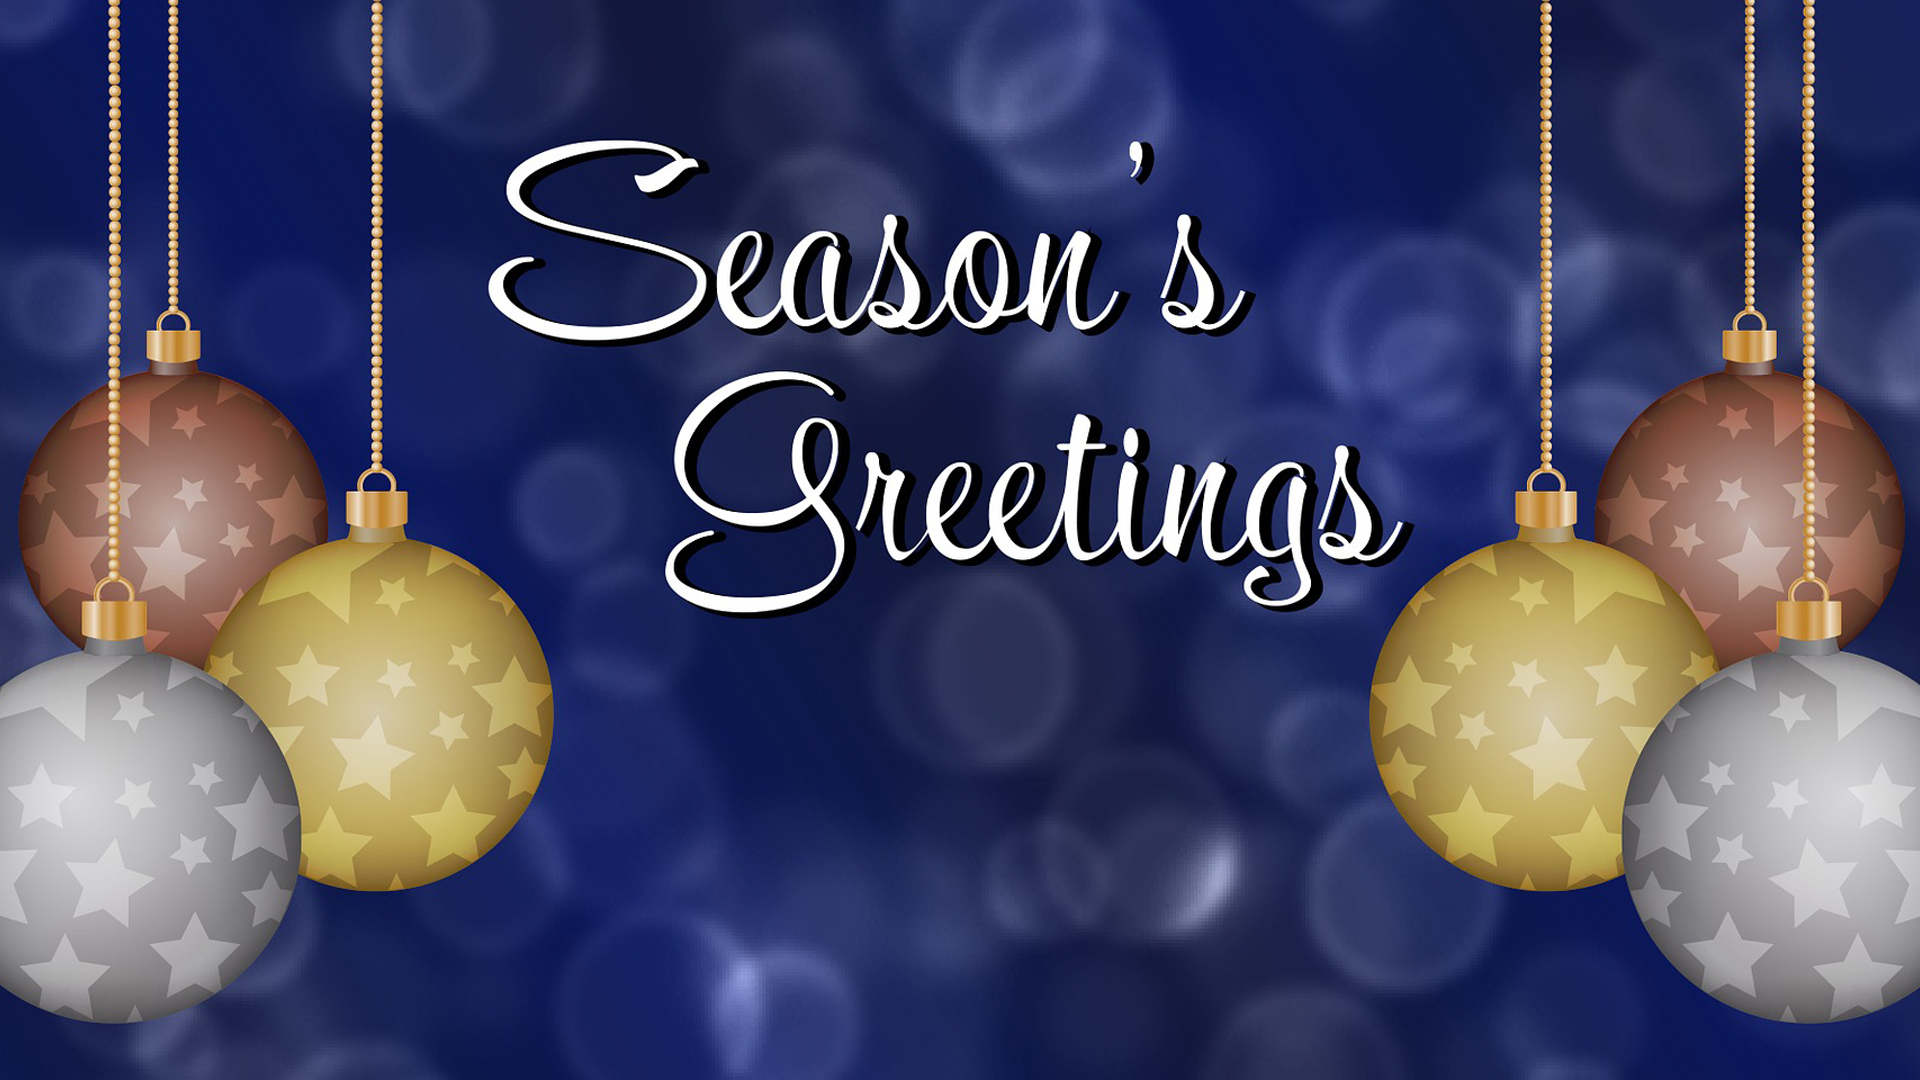 Navy blue background with transparent white circles. 2 groups of 3 gold, bronze, and silver circular ornaments with stars on them on both sides of the graphic with a white script font saying Season Greetings